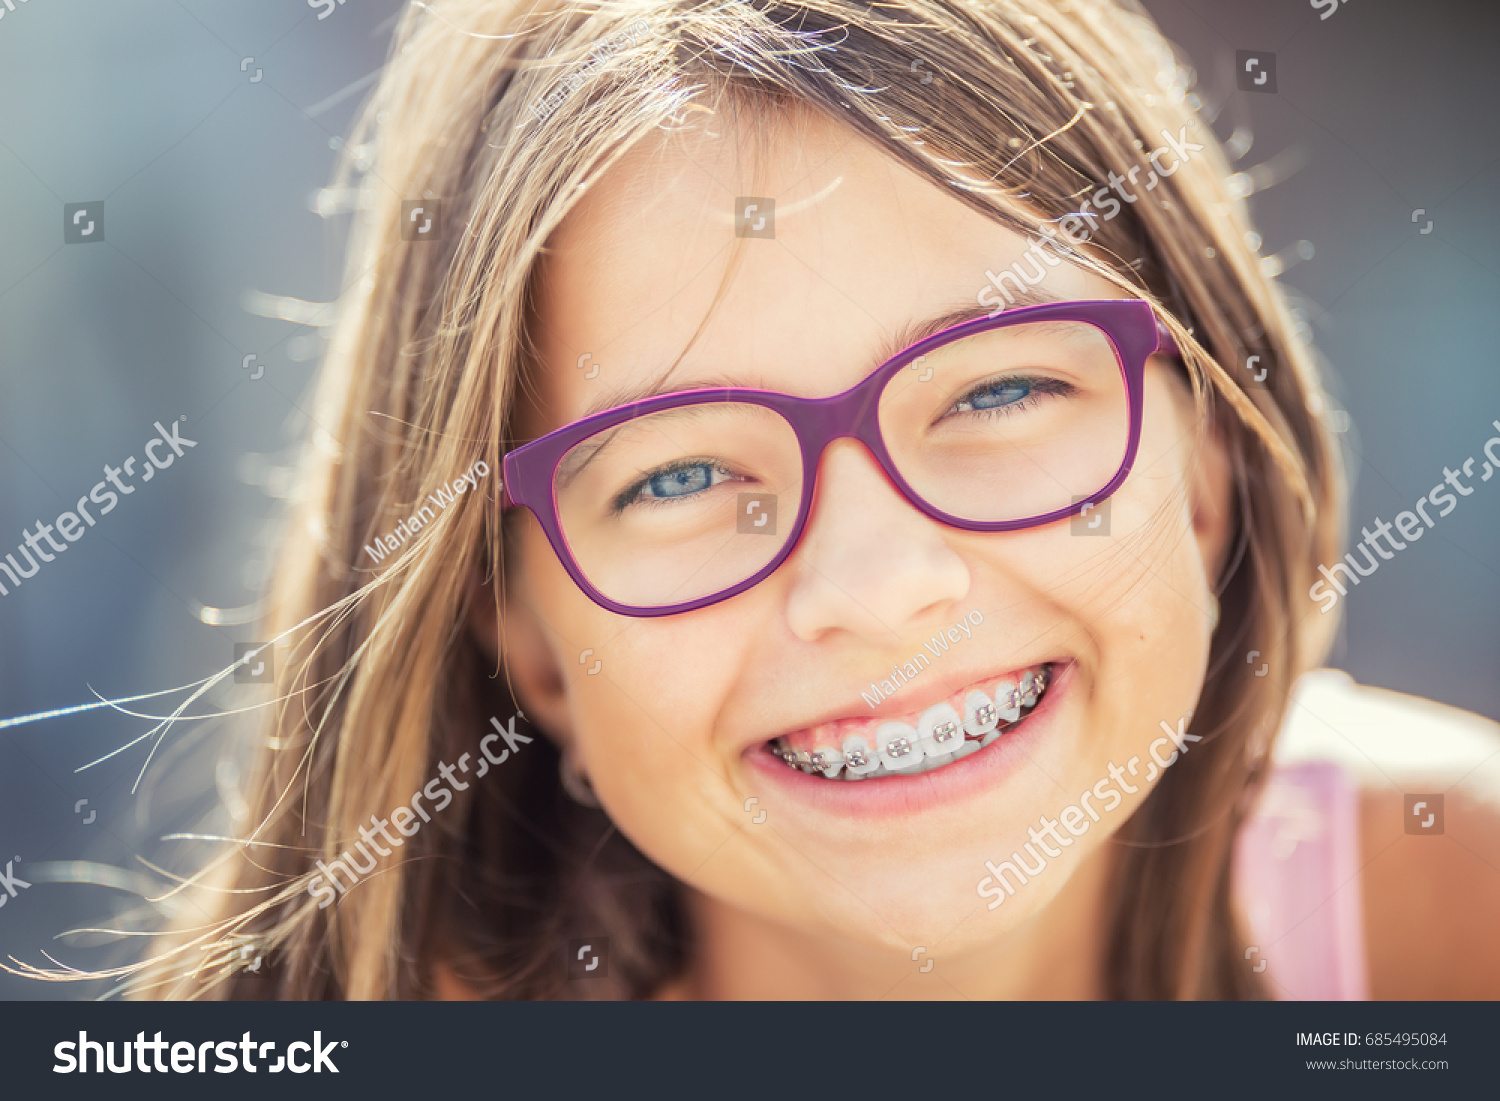 Happy smiling girl with dental braces and glasses.  #685495084